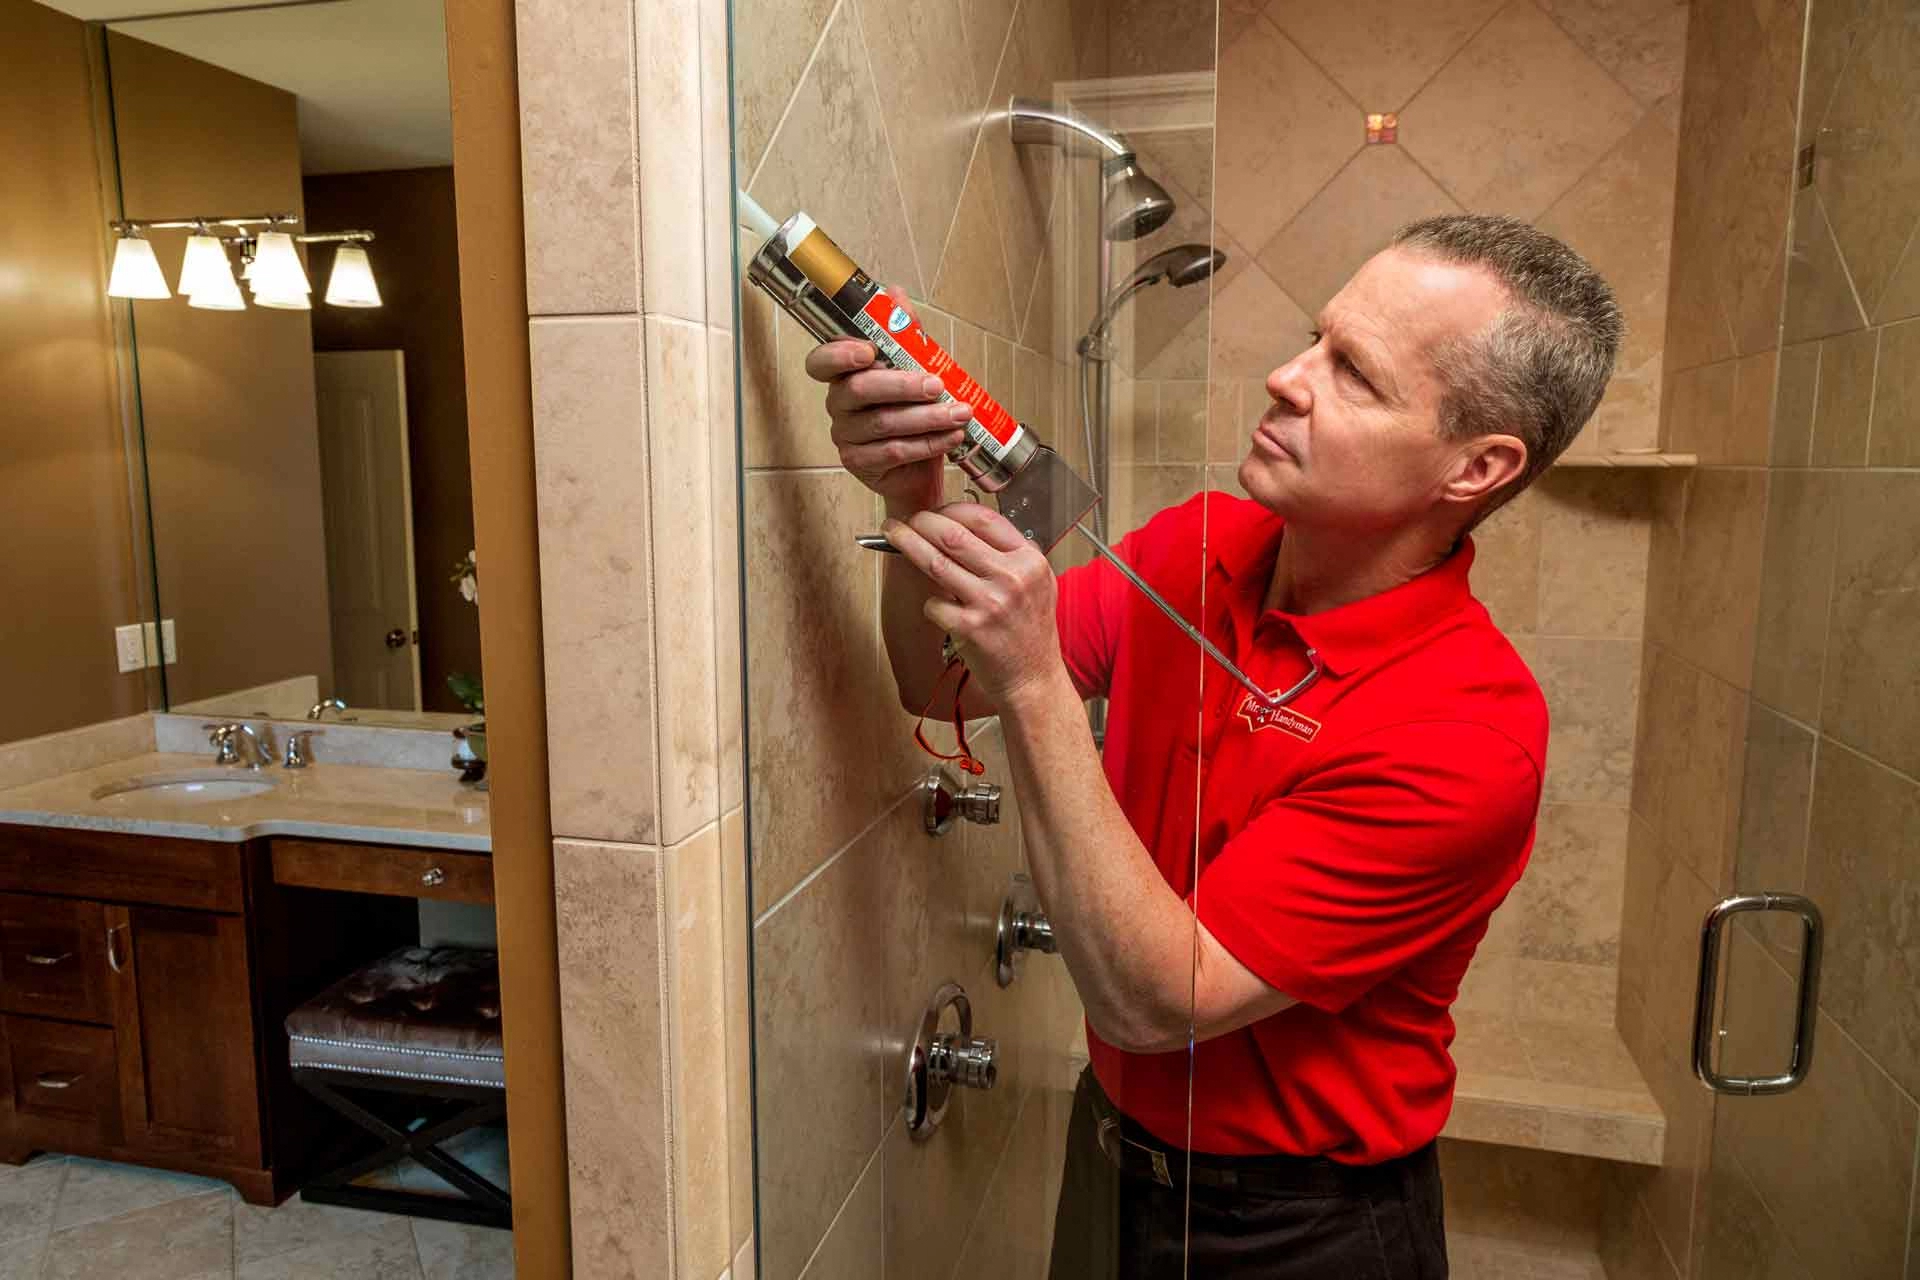 A handyman from Mr. Handyman caulking the gap between a glass shower wall and tile shower wall while providing services for shower remodeling in Denton, TX.